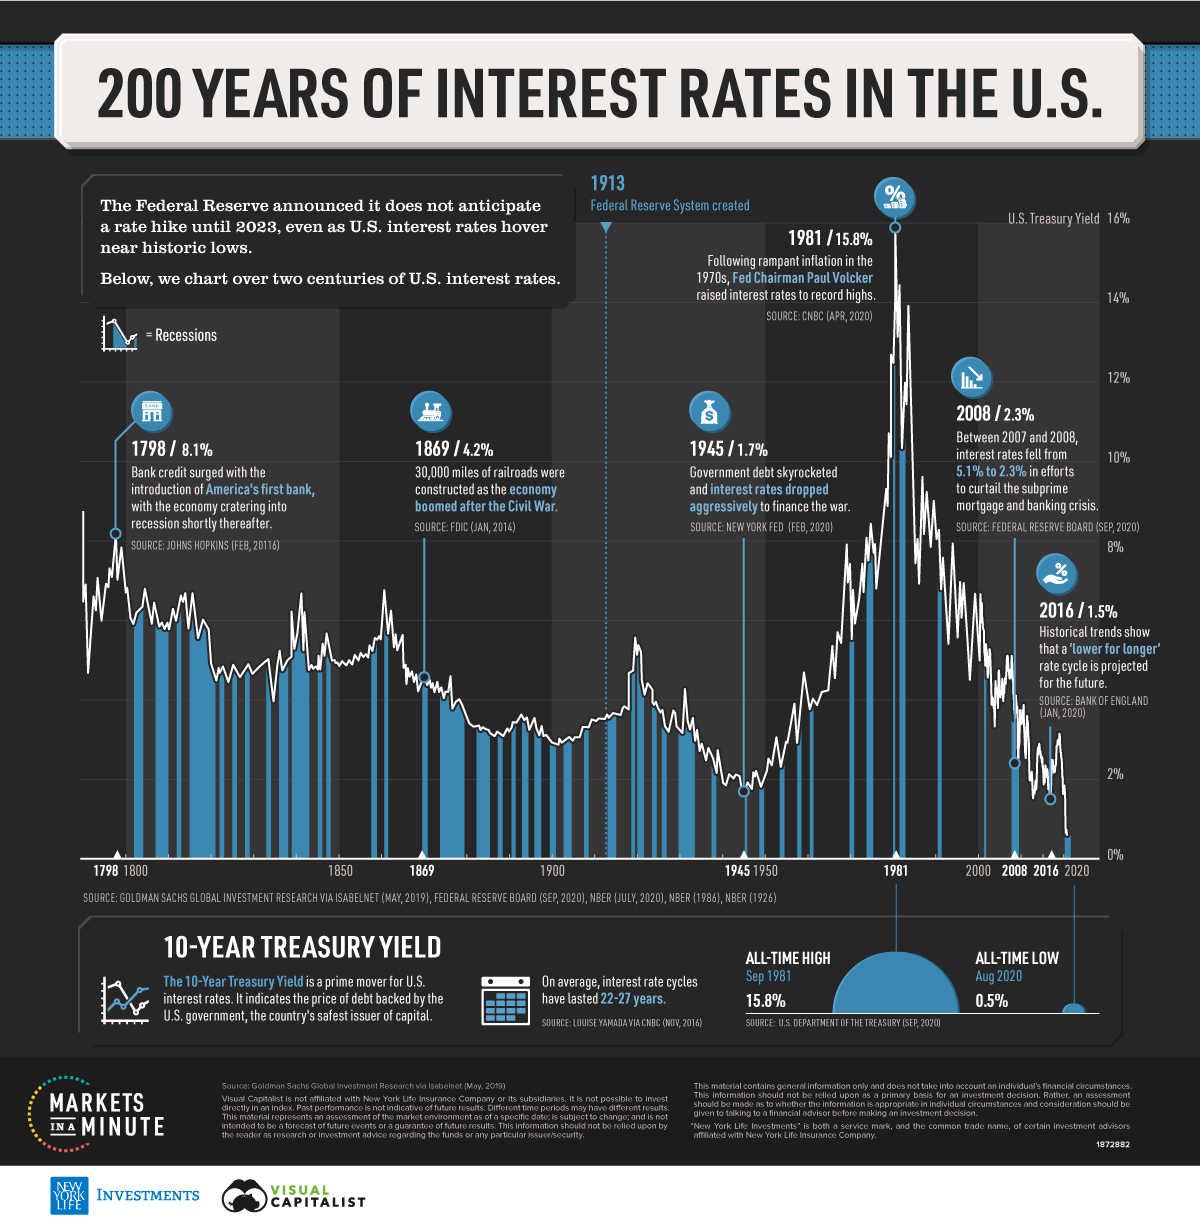 200 years of interest rates